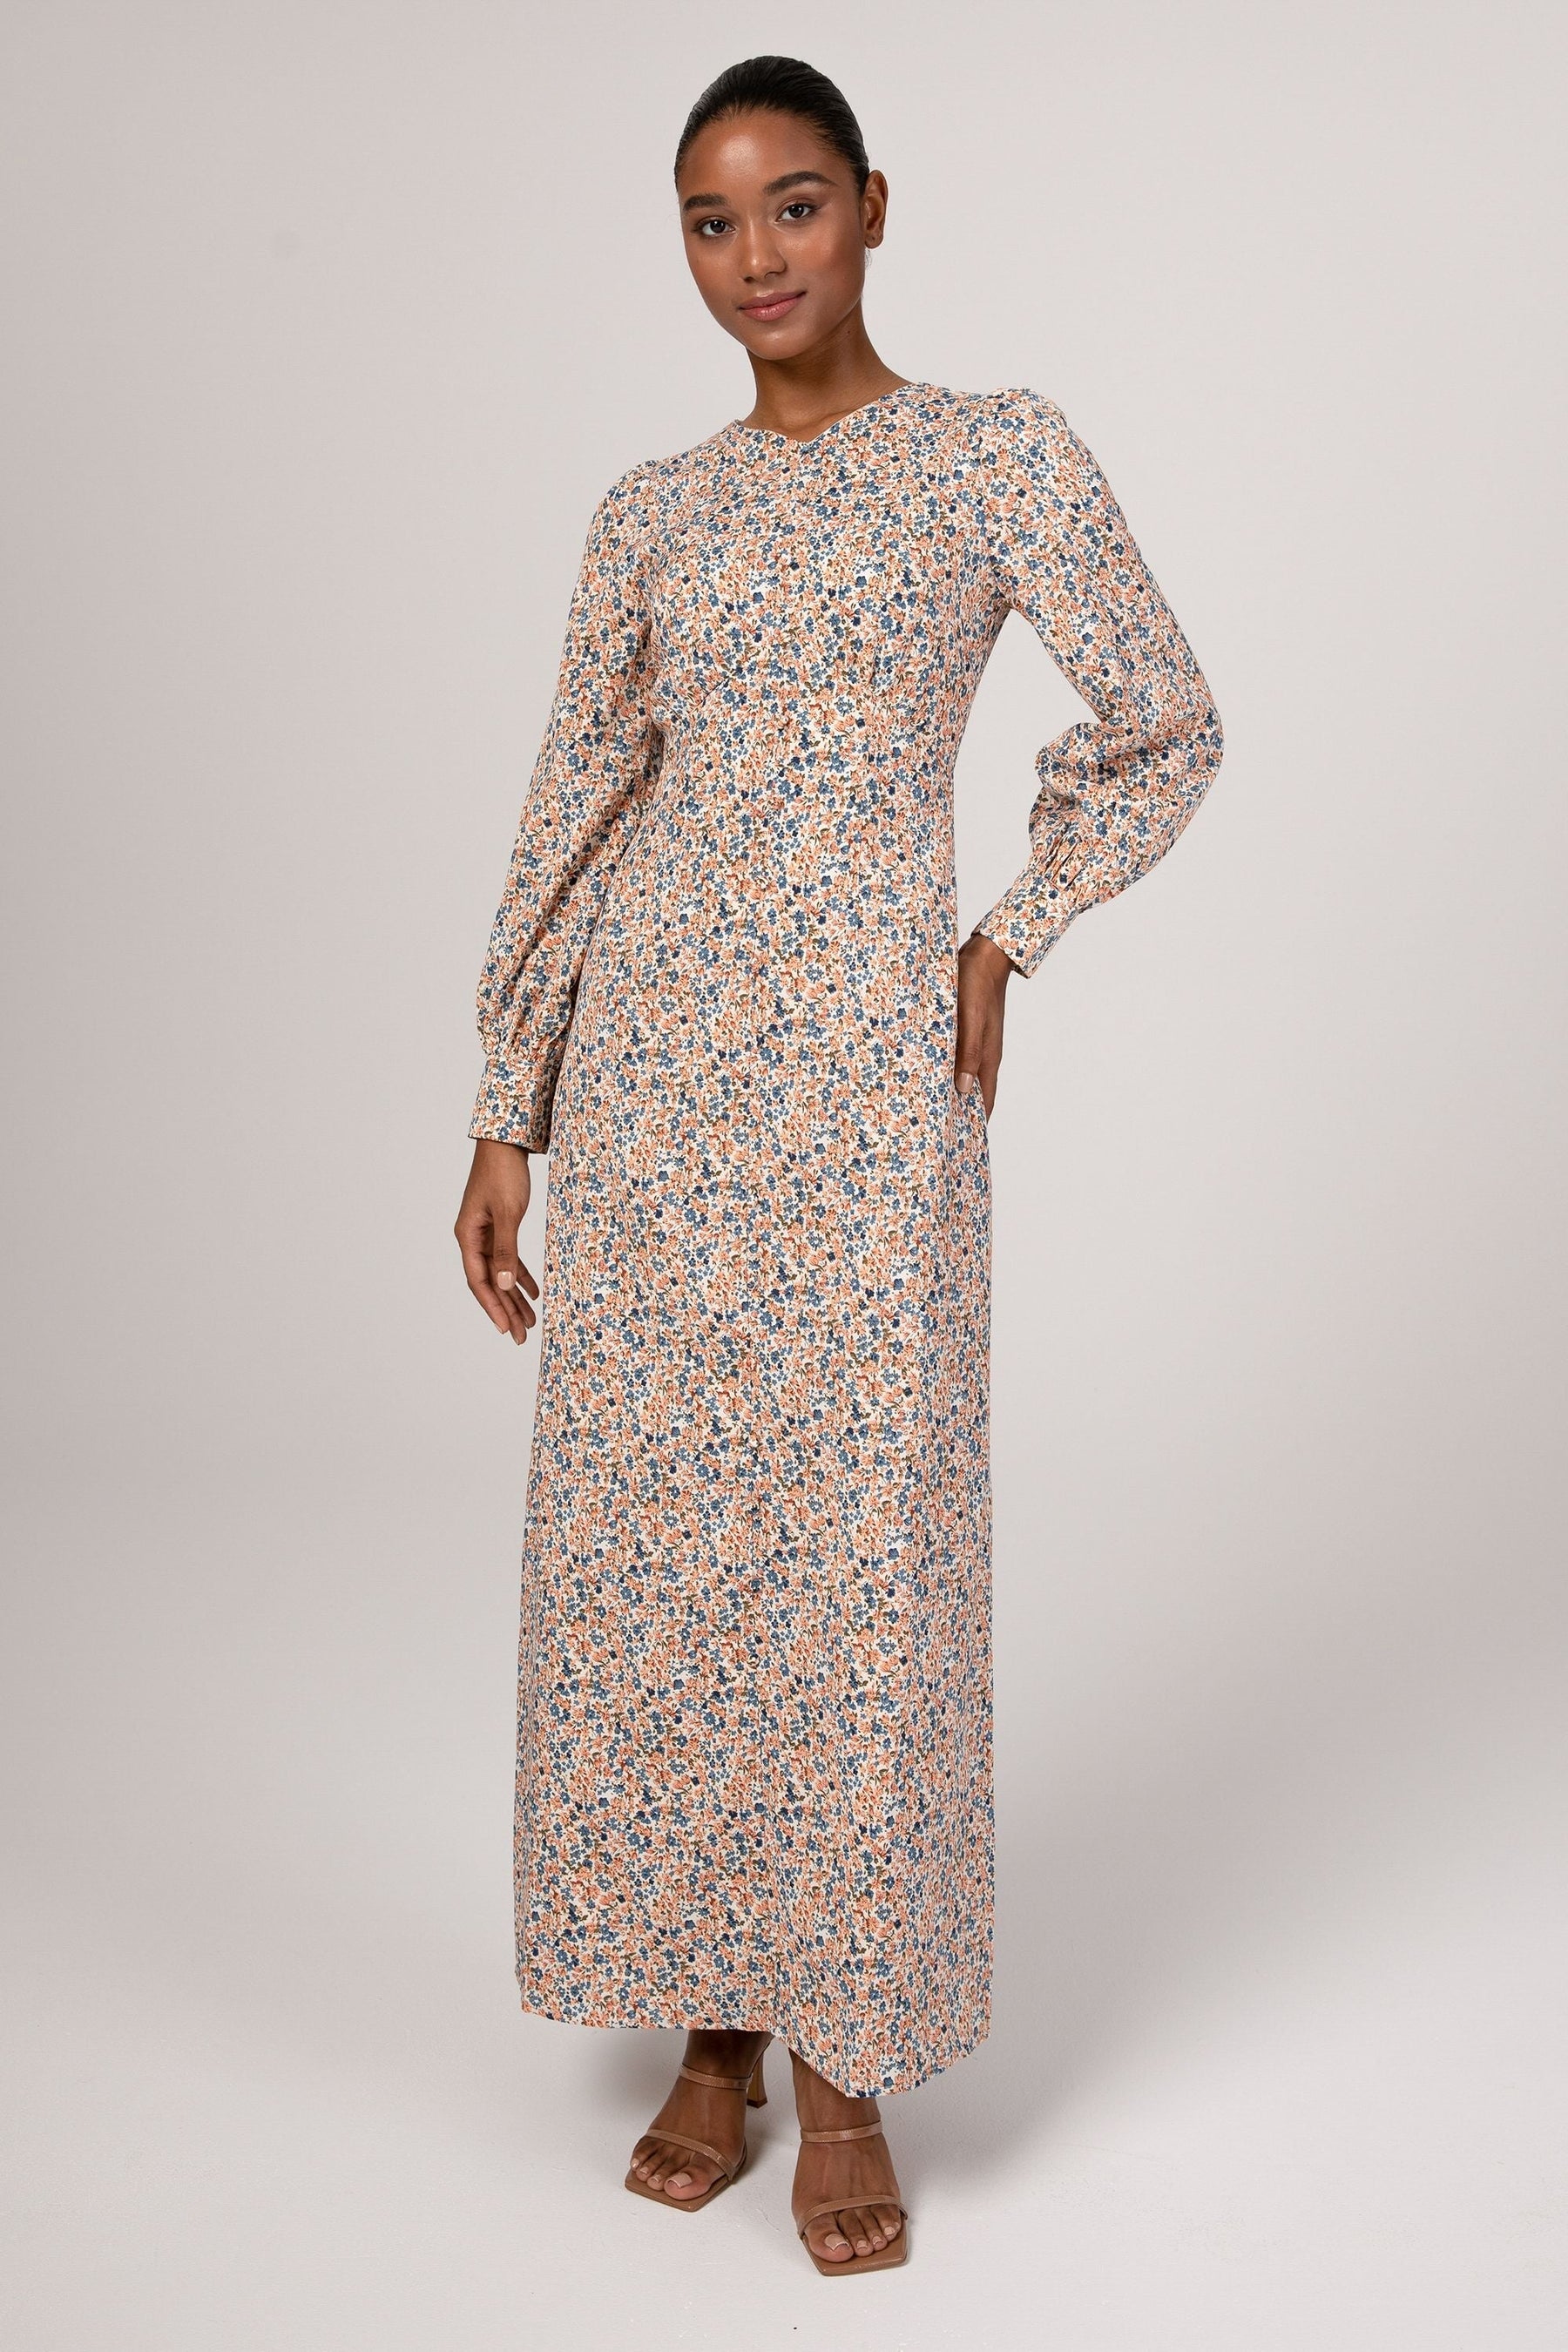 Anaya Button Front Maxi Dress - Blue Floral Veiled Collection 